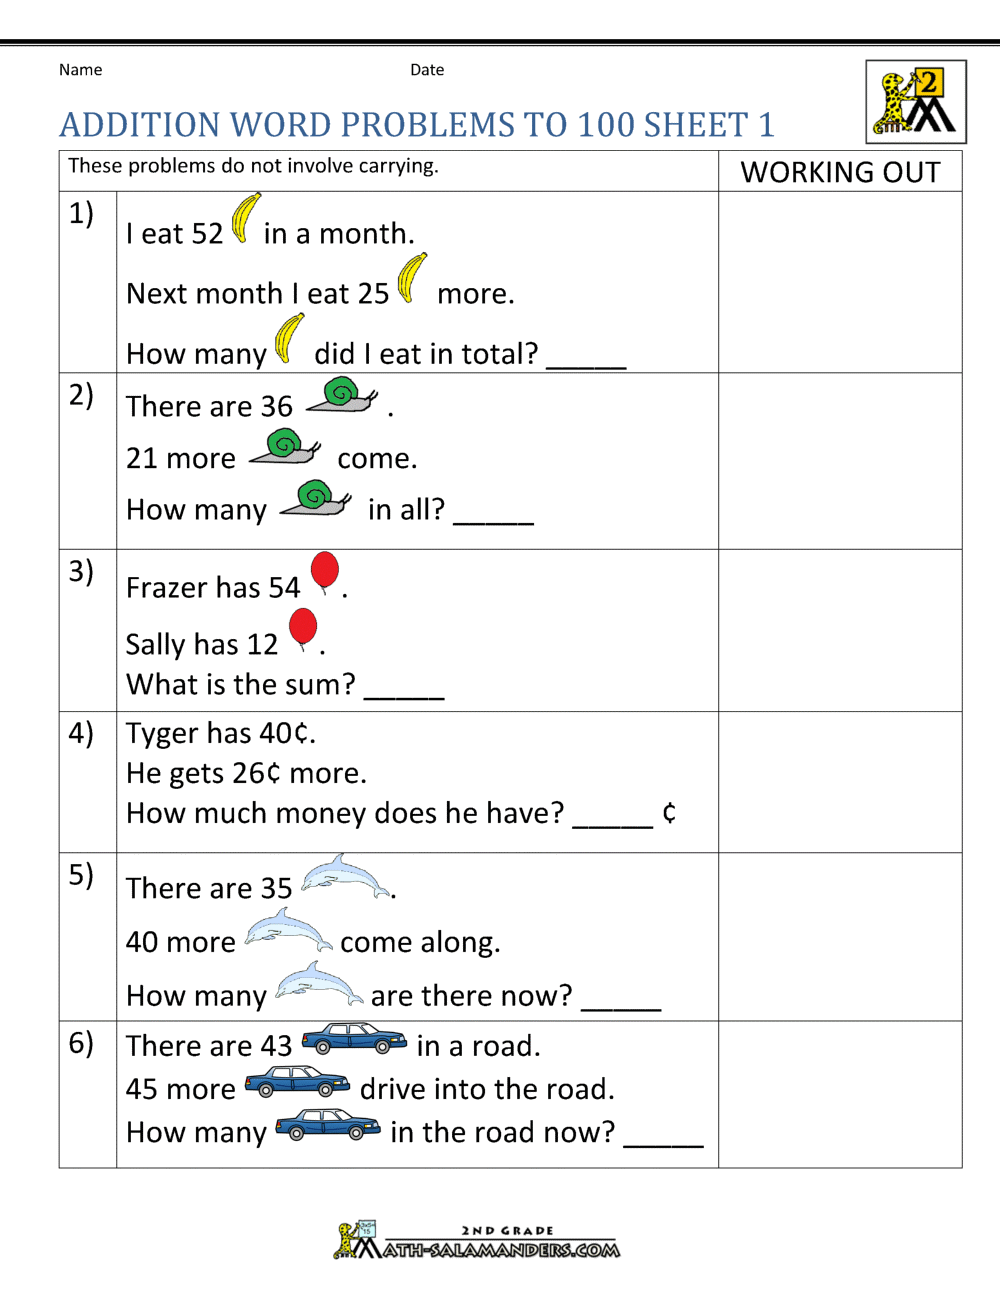 Types Of Addition Word Problems Free Printable Worksheet